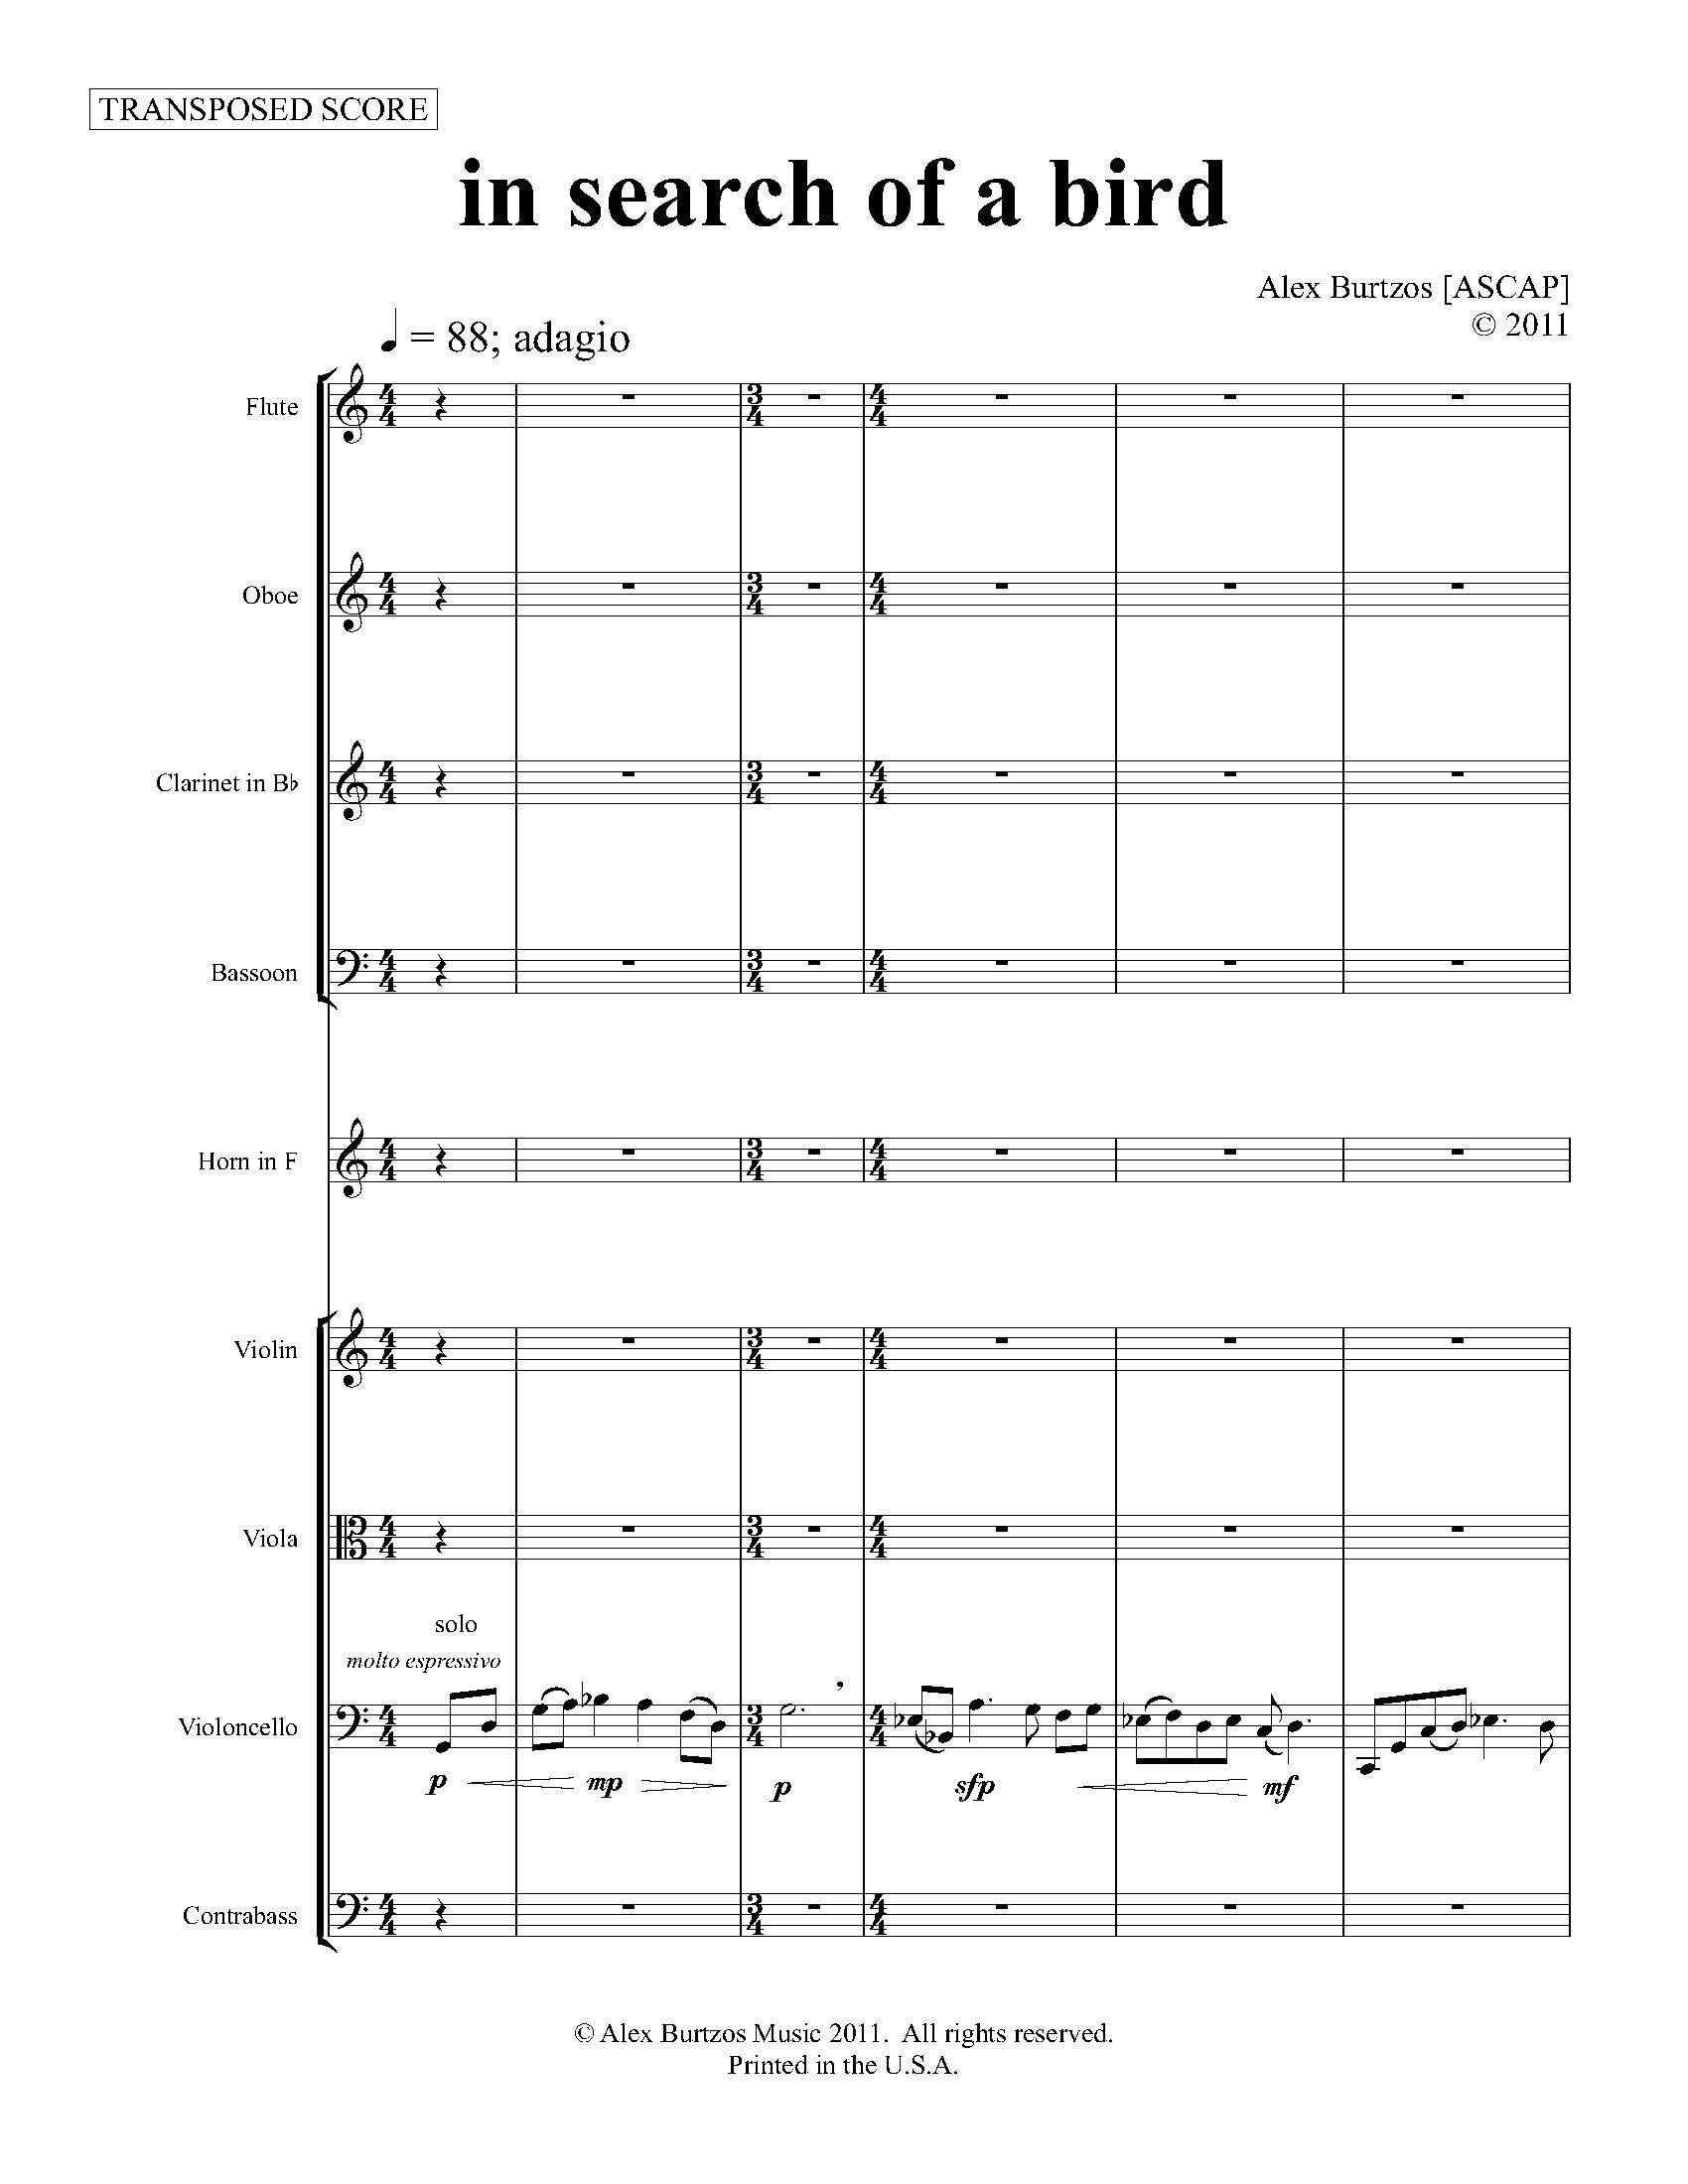 In Search of a Bird - Complete Score_Page_07.jpg